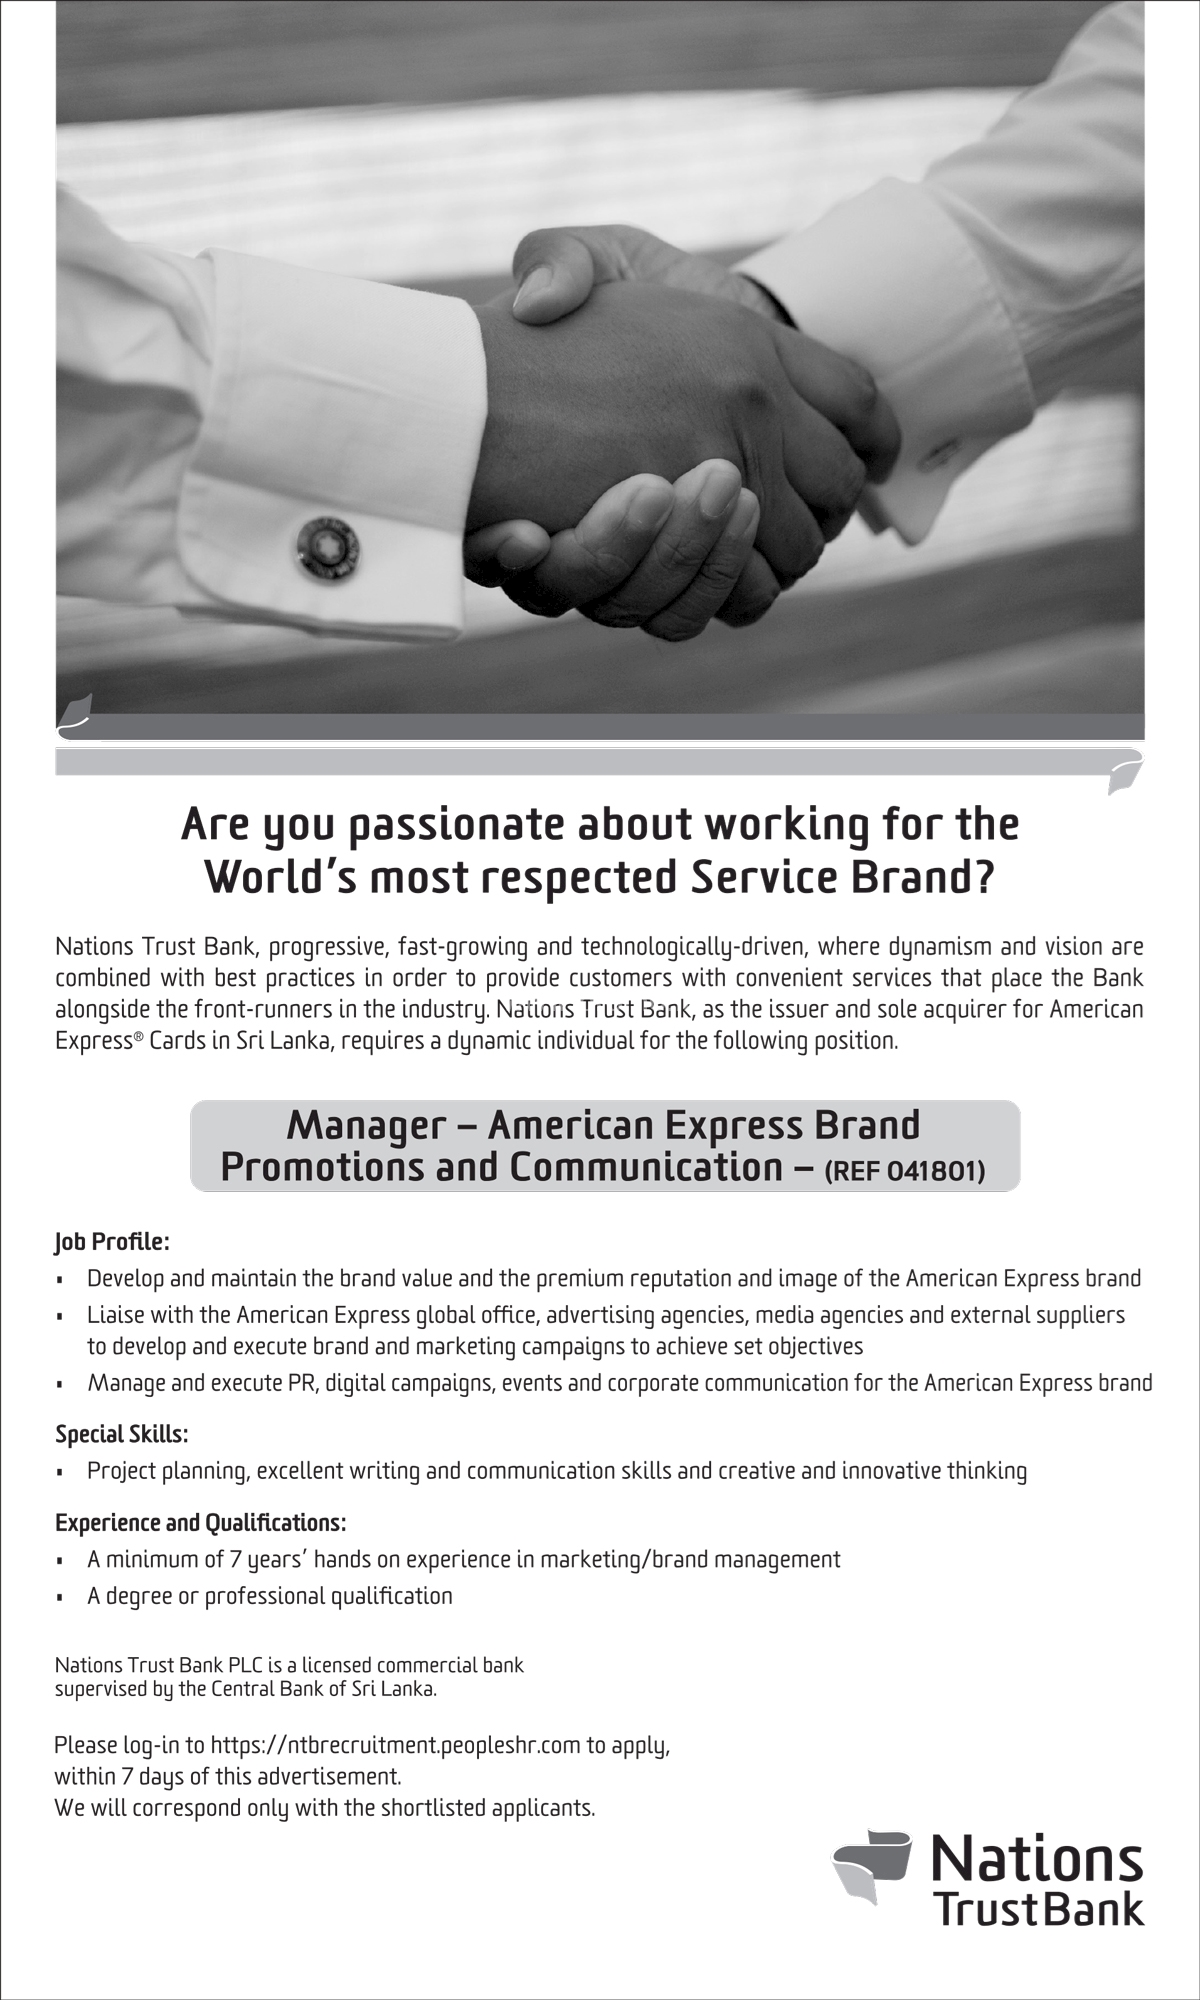 Manager of American Express Brand Promotions and Communication NTB